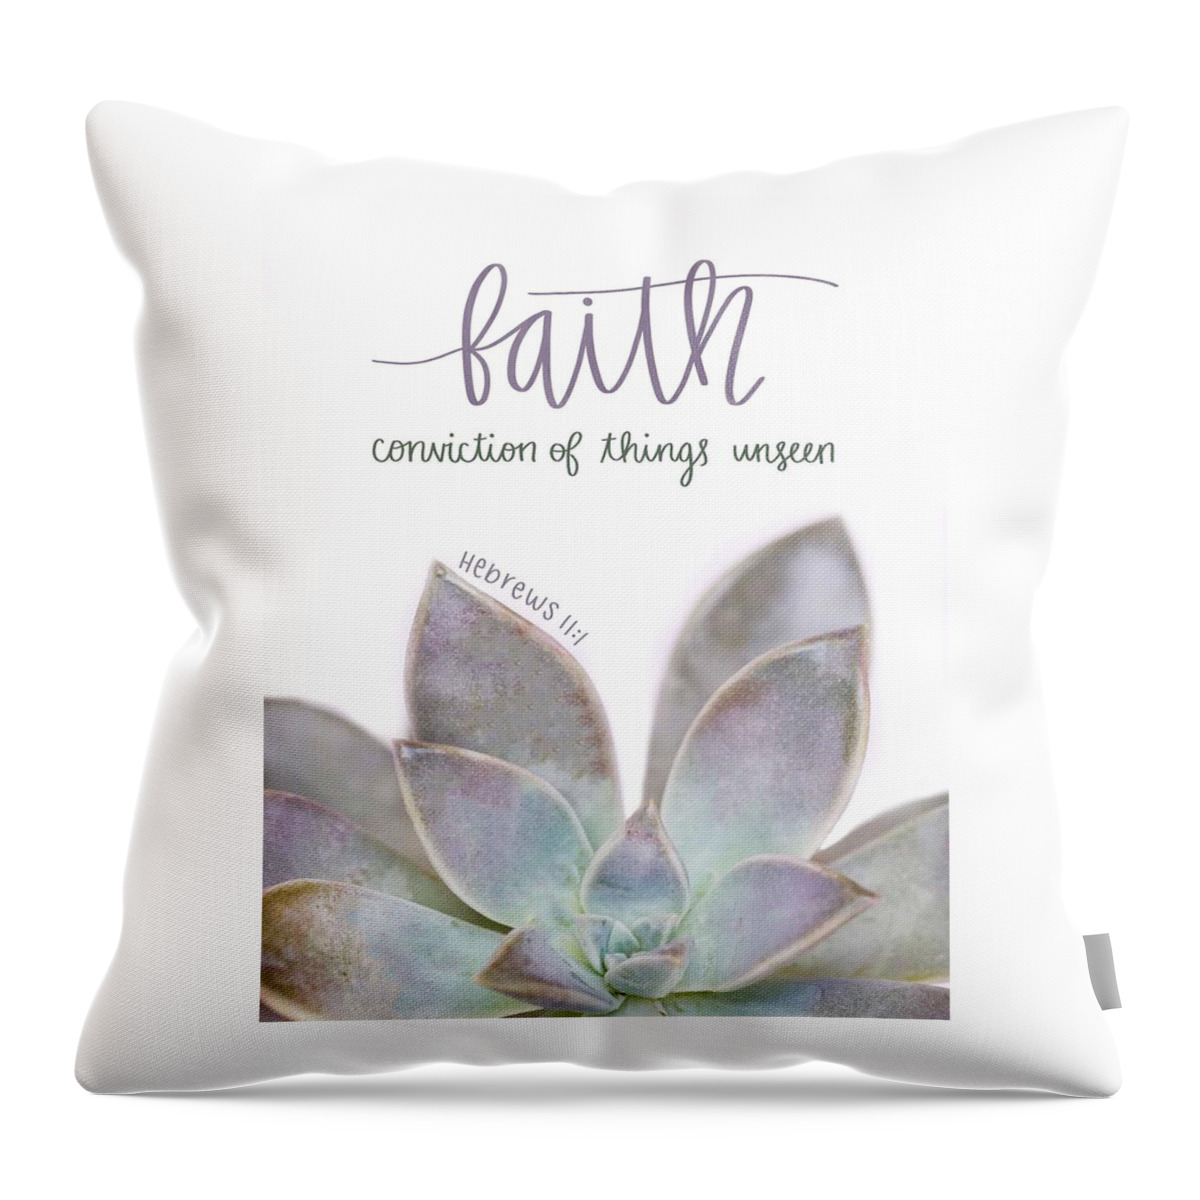  Throw Pillow featuring the digital art Faith Conviction of Things Unseen by Stephanie Fritz